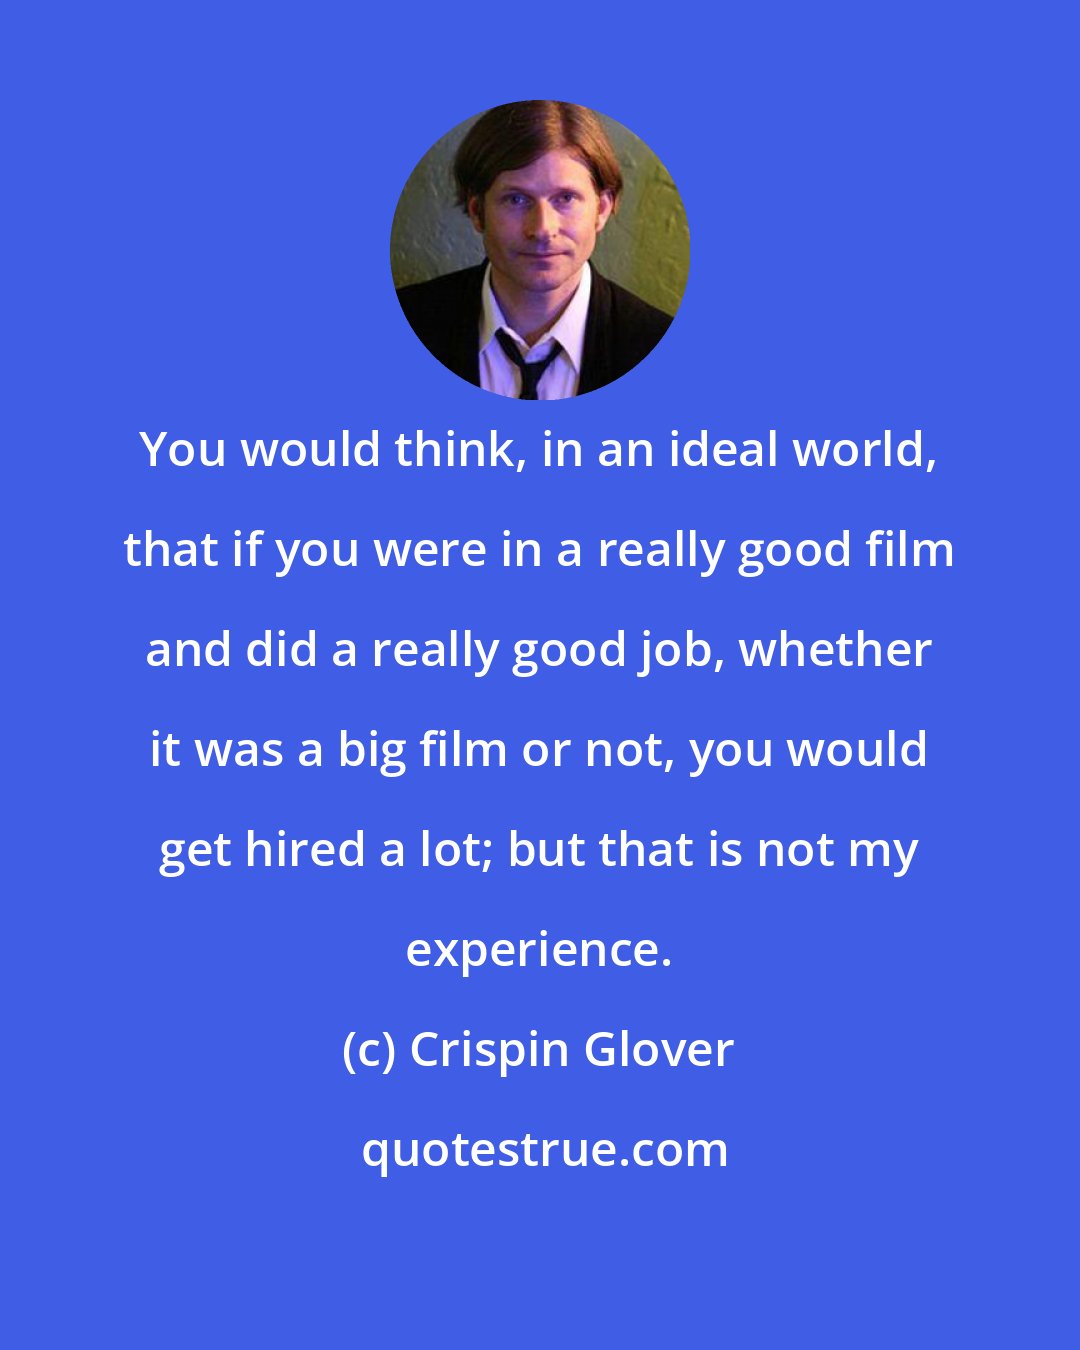 Crispin Glover: You would think, in an ideal world, that if you were in a really good film and did a really good job, whether it was a big film or not, you would get hired a lot; but that is not my experience.